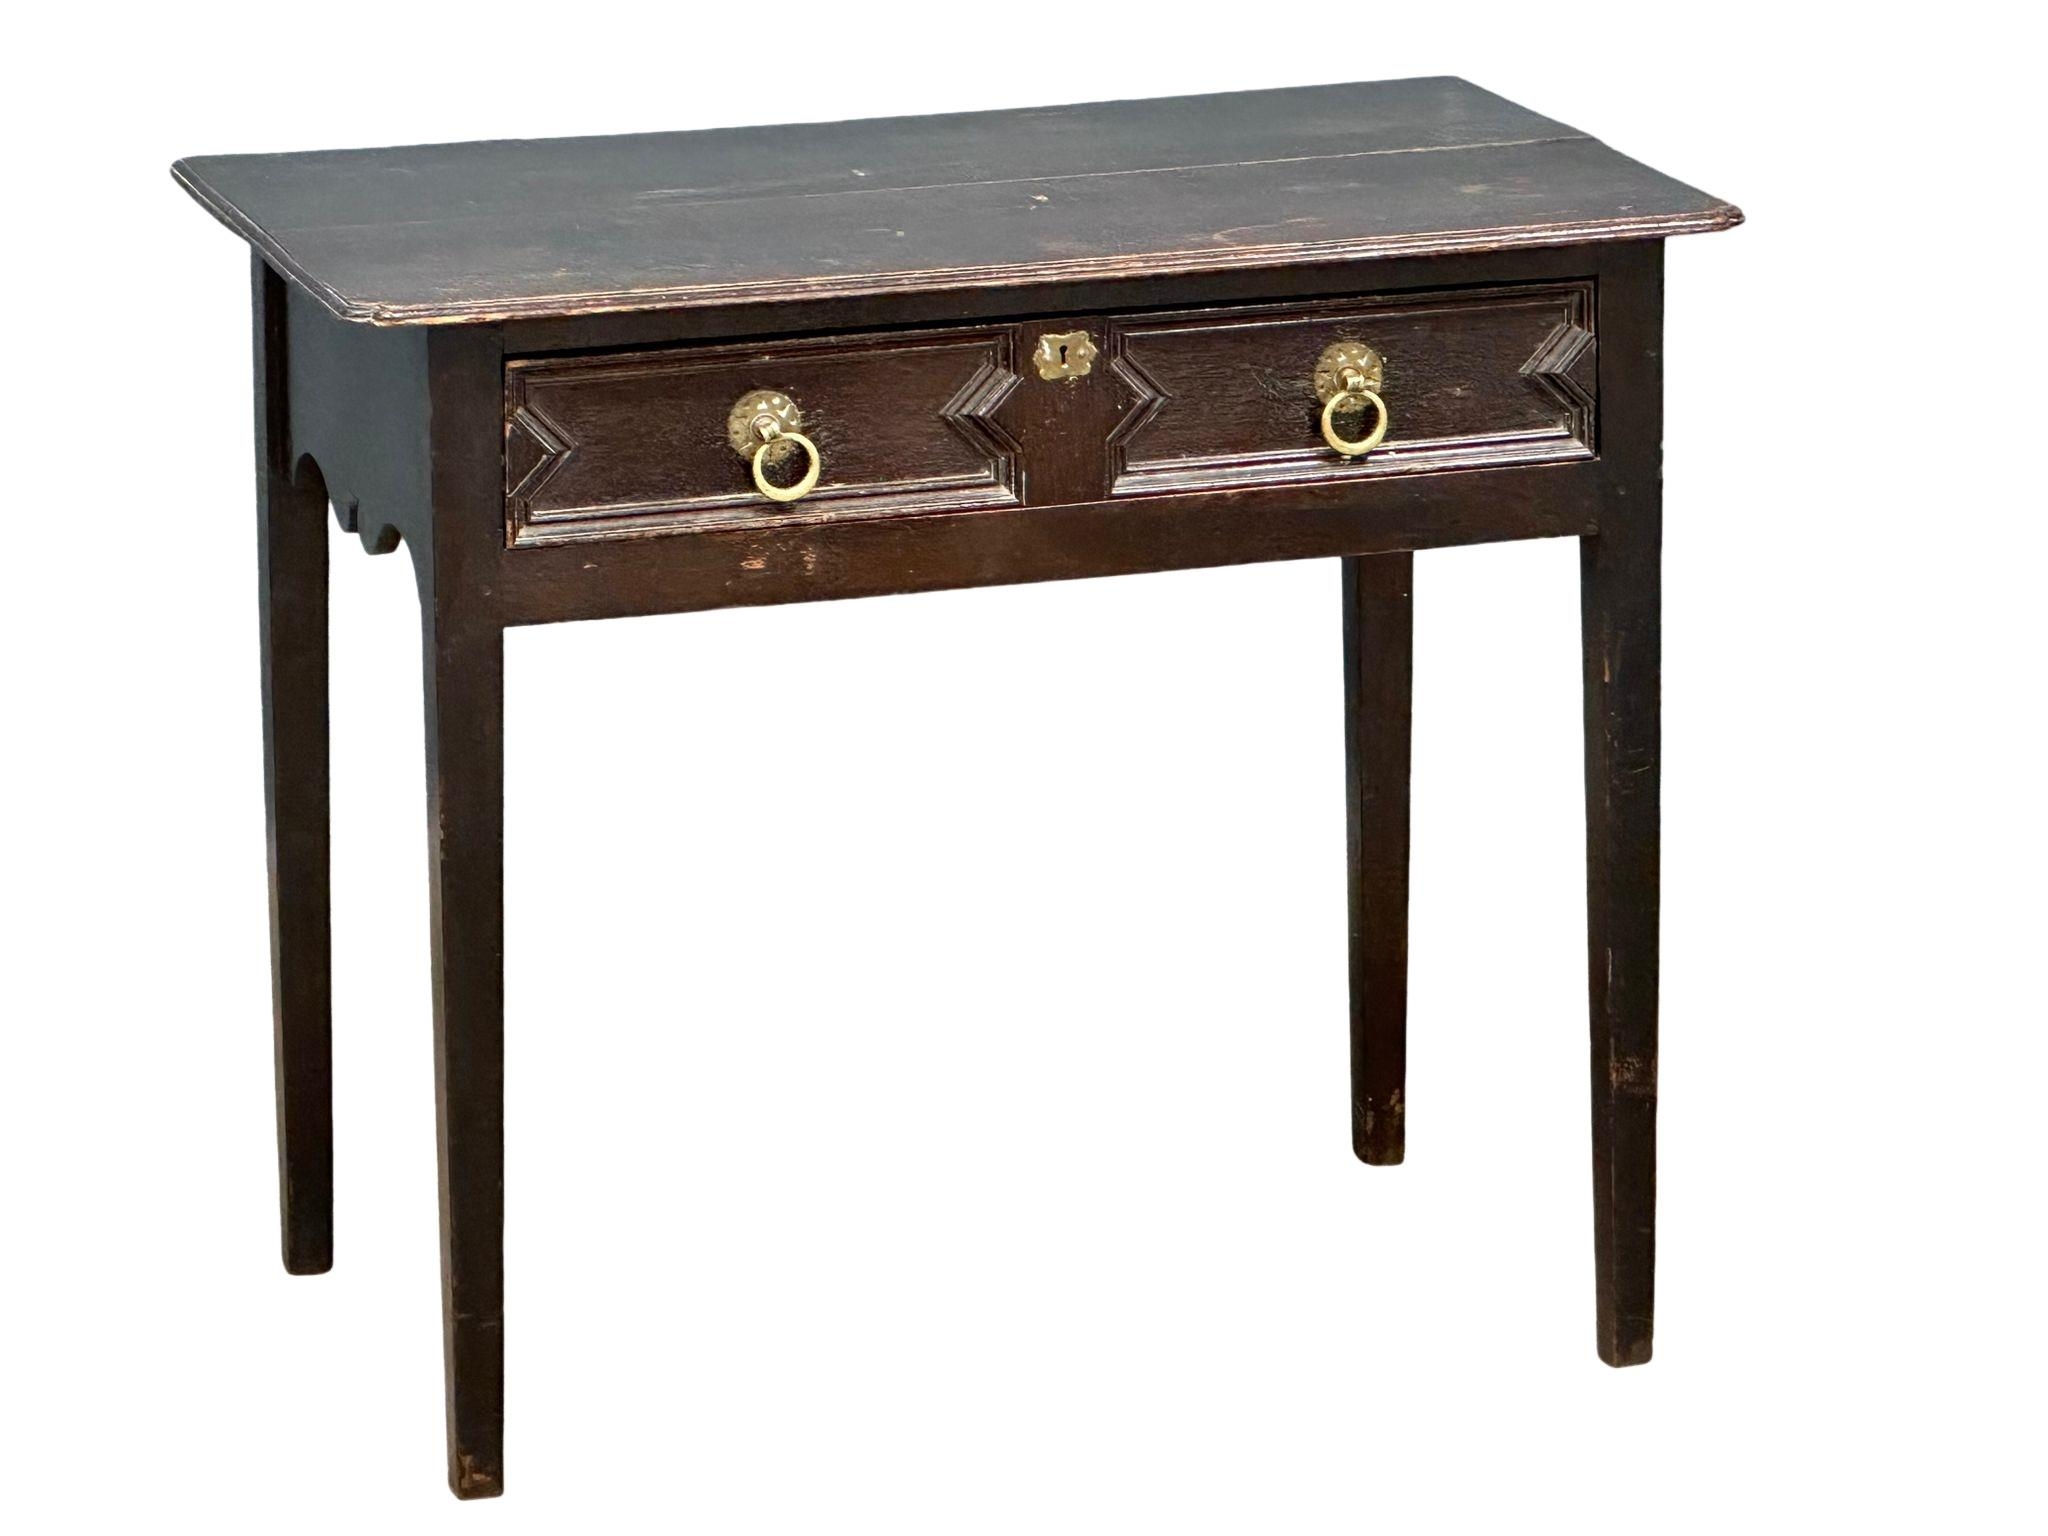 A Mid 19th century oak side table in the 17th century style. Circa 1830-1850. 89x53x75cm 1